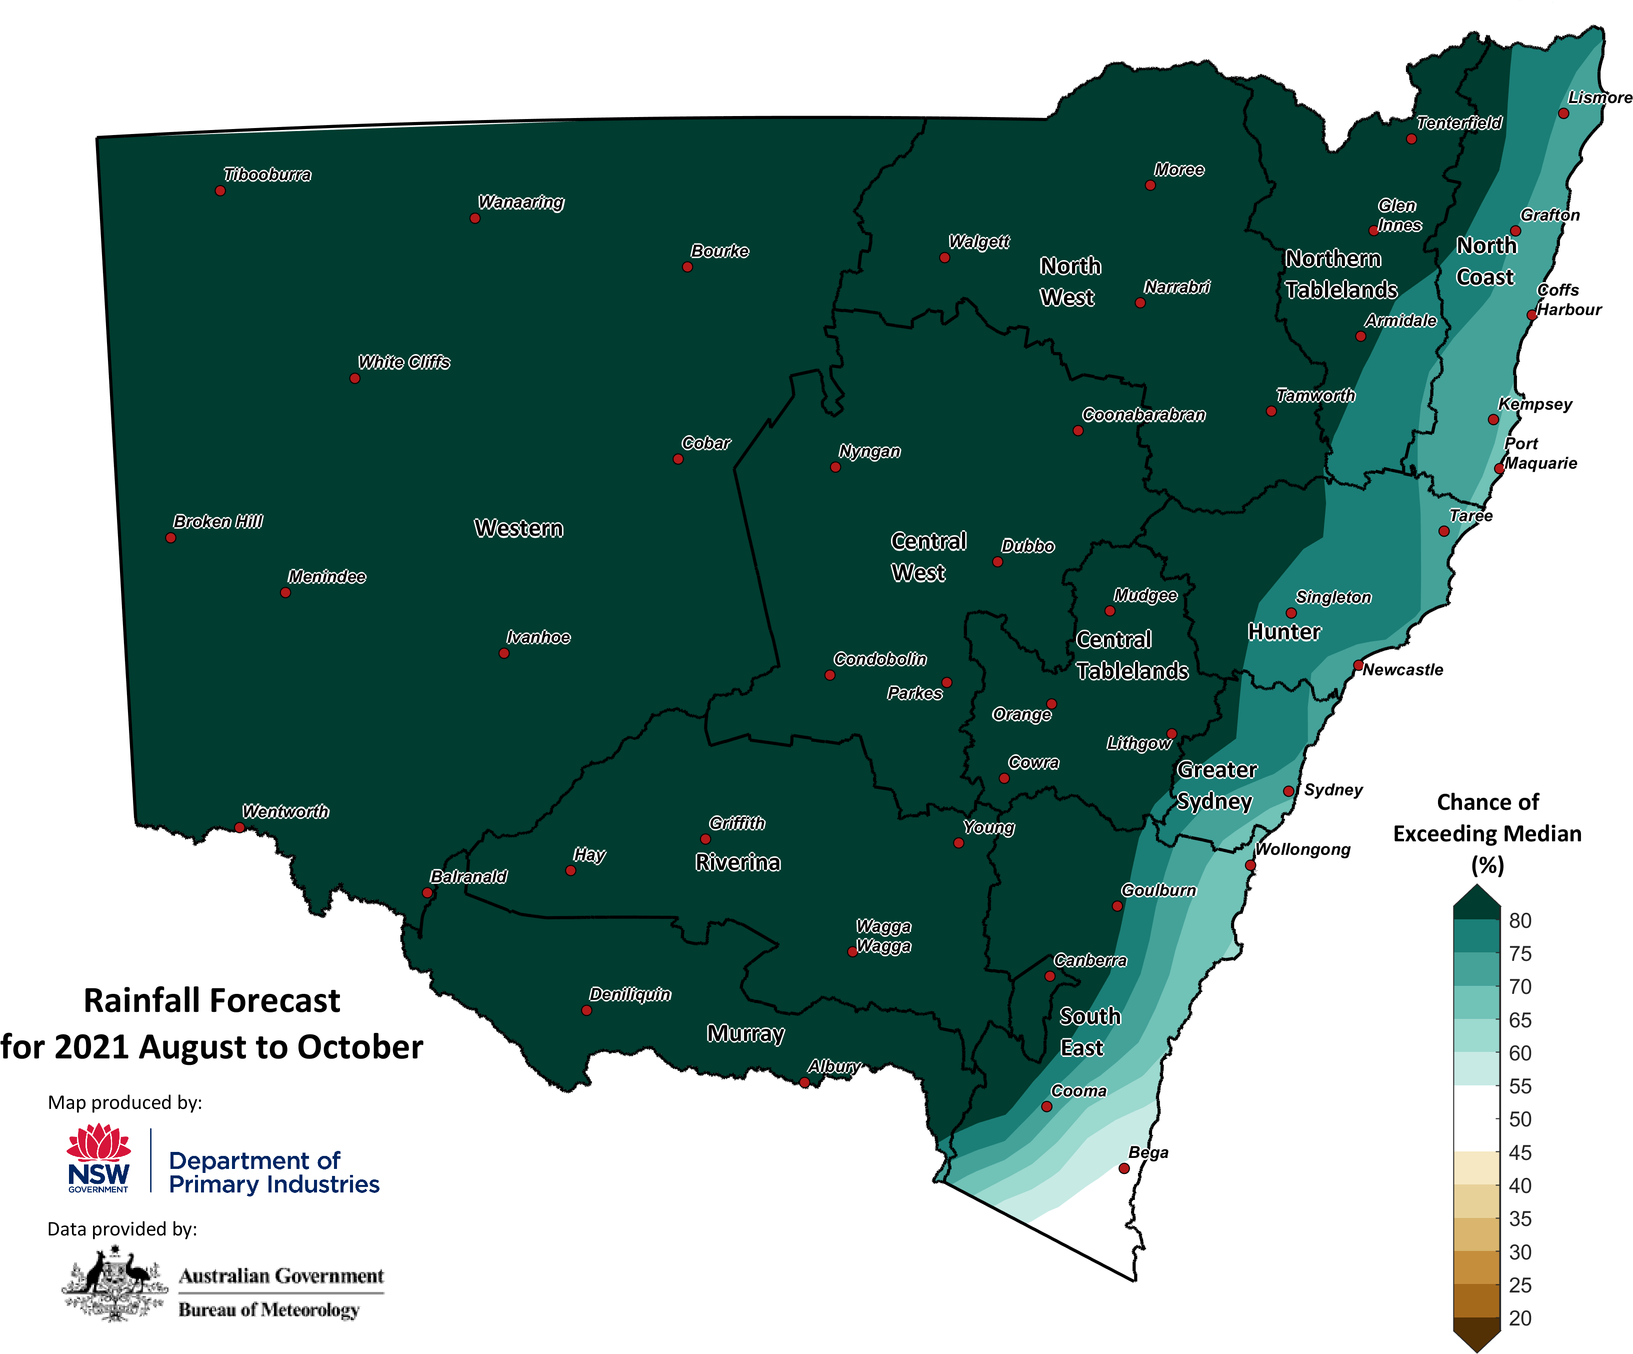 Seasonal rainfall outlook for NSW issued on 1 July 2021